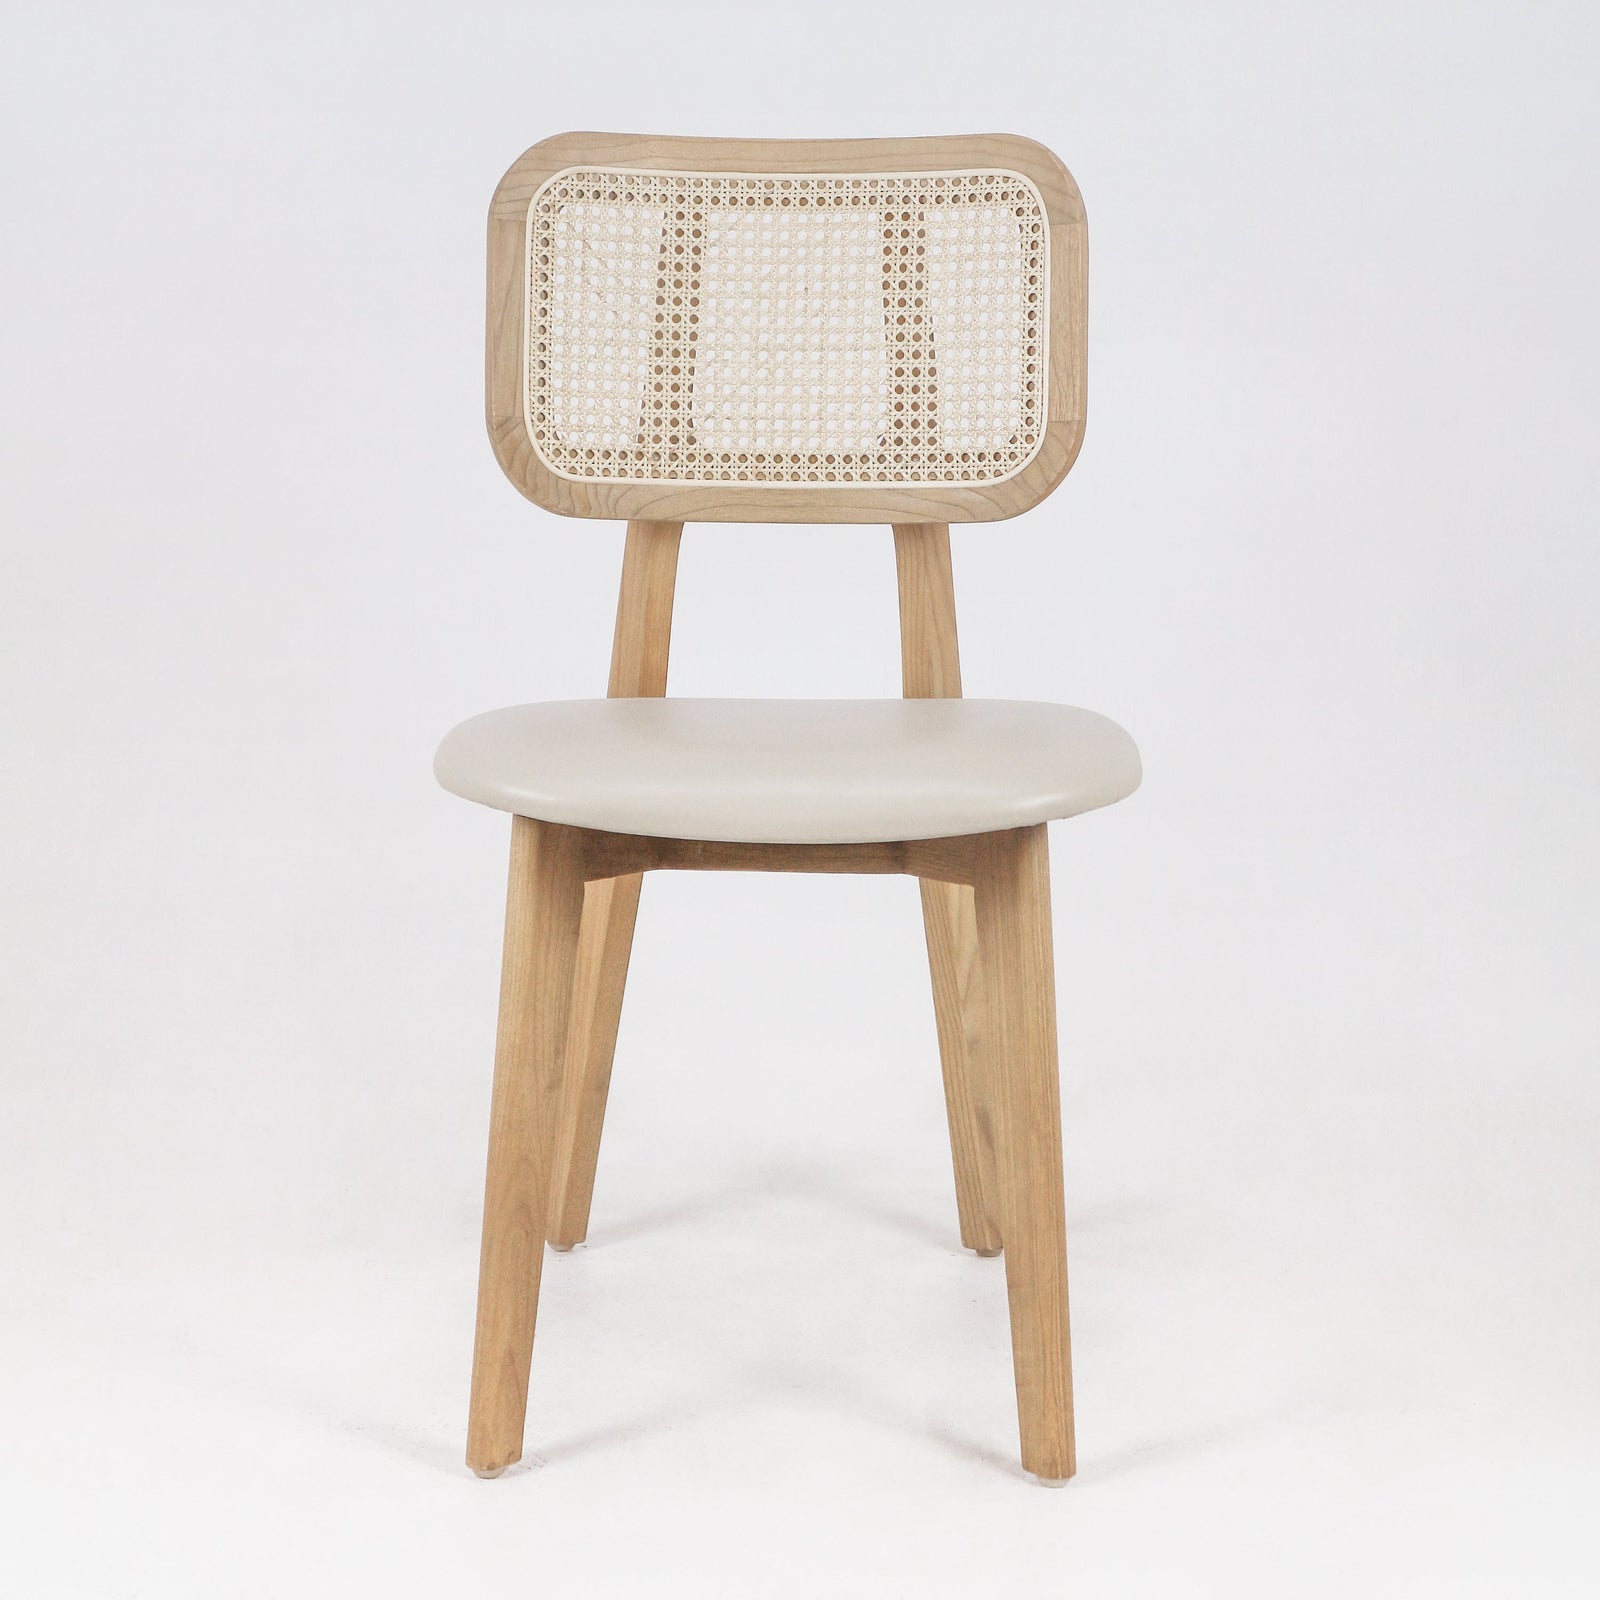 Abode Dining Chair with Rattan Backrest with Leather Seat - INTERIORTONIC